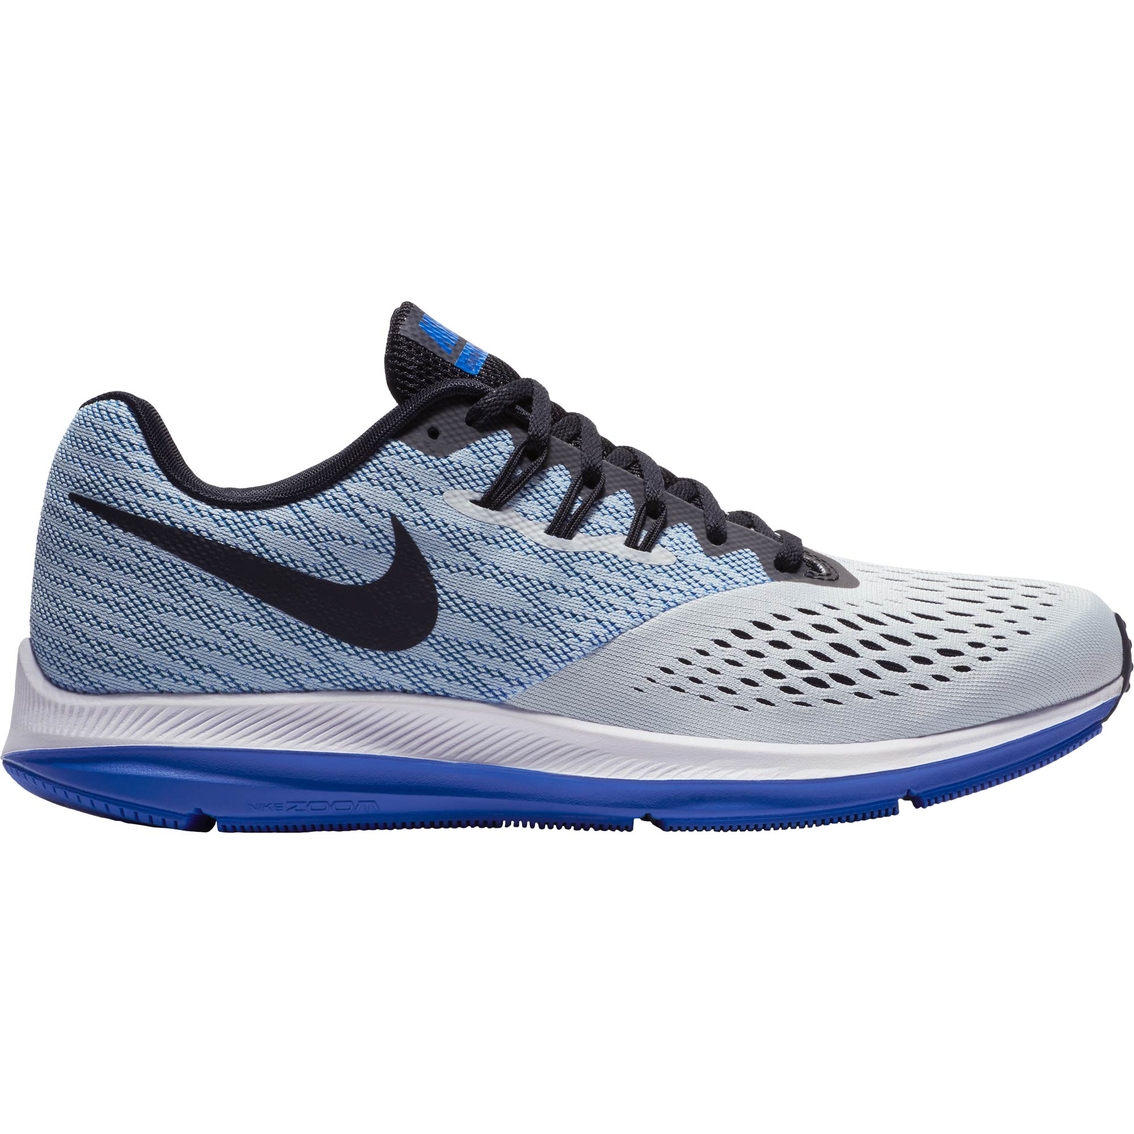 Nike Men's Zoom Winflo 4 Running Shoes | Running | Shoes | Shop The ...